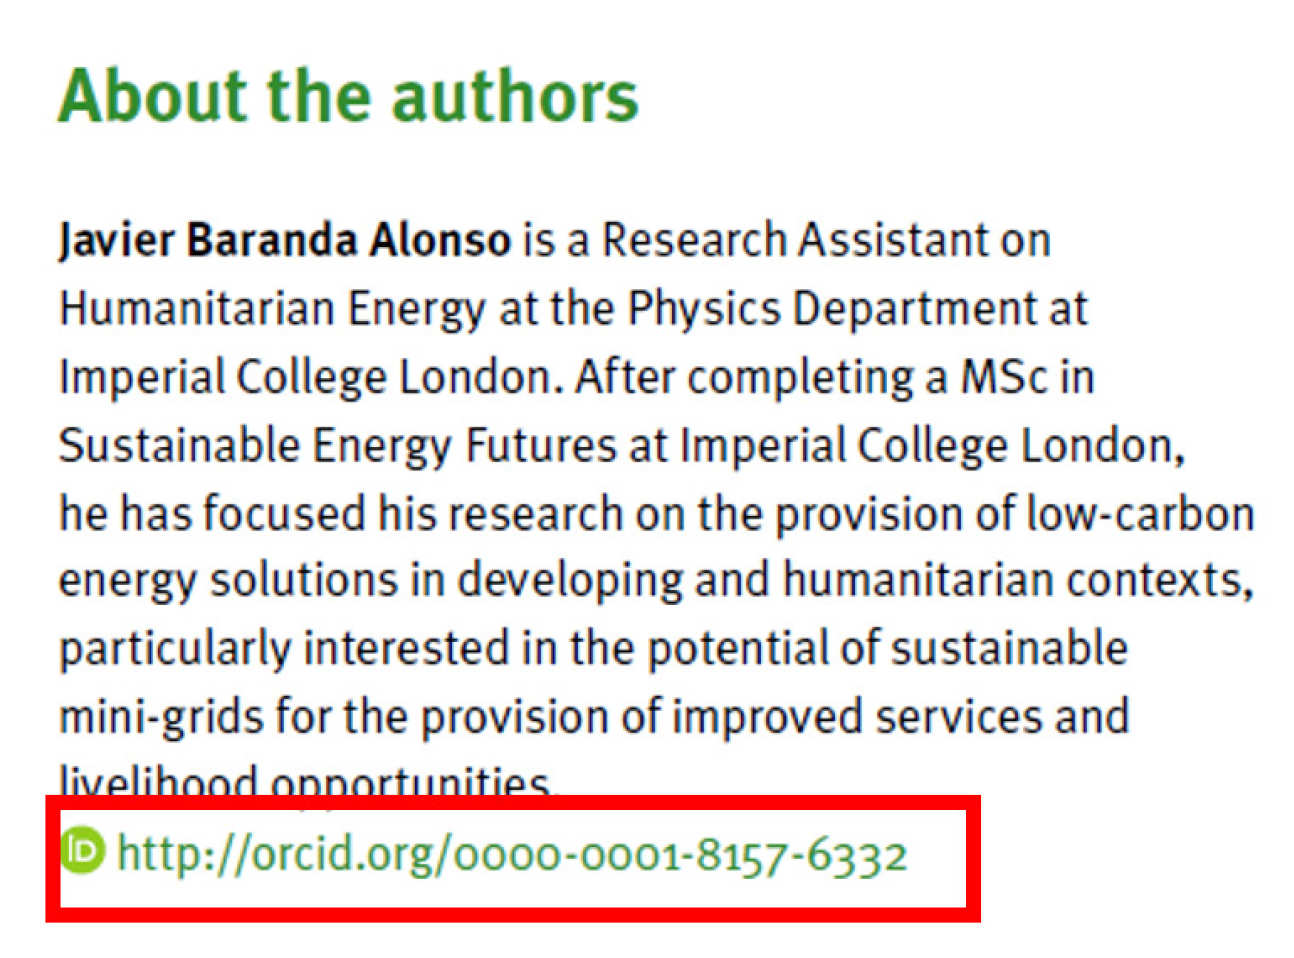 About the authors section with ORCID id link highlighted